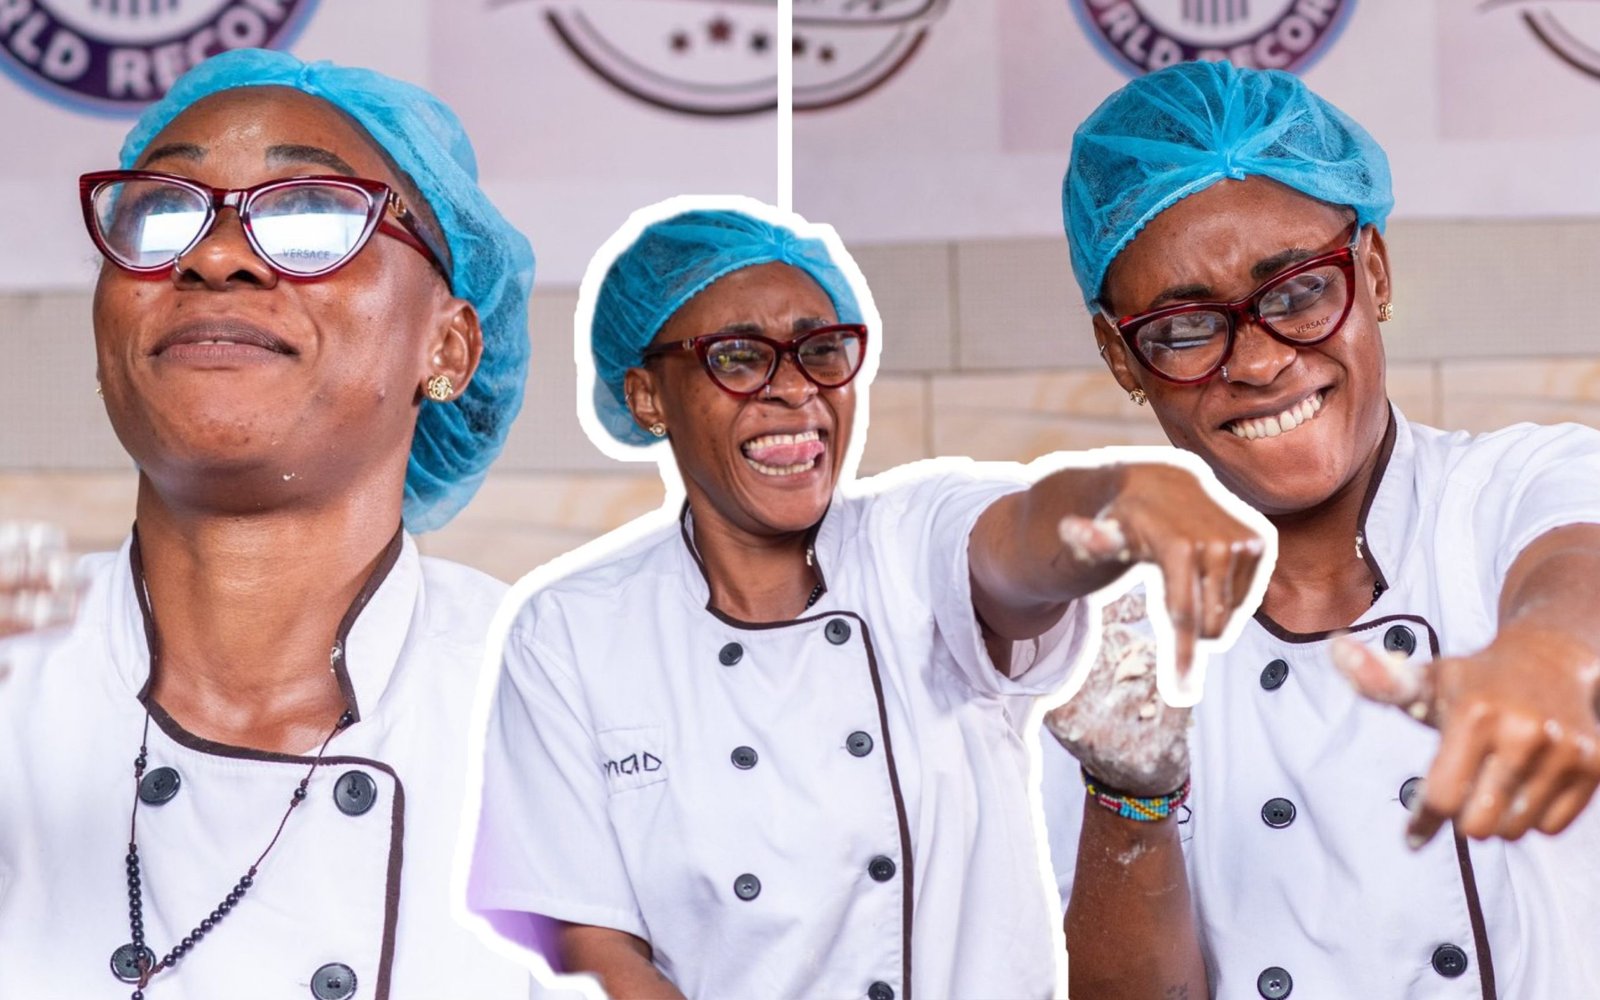 mama-d-will-reattempt-breaking-guinness-world-record-for-longest-cooking-marathon